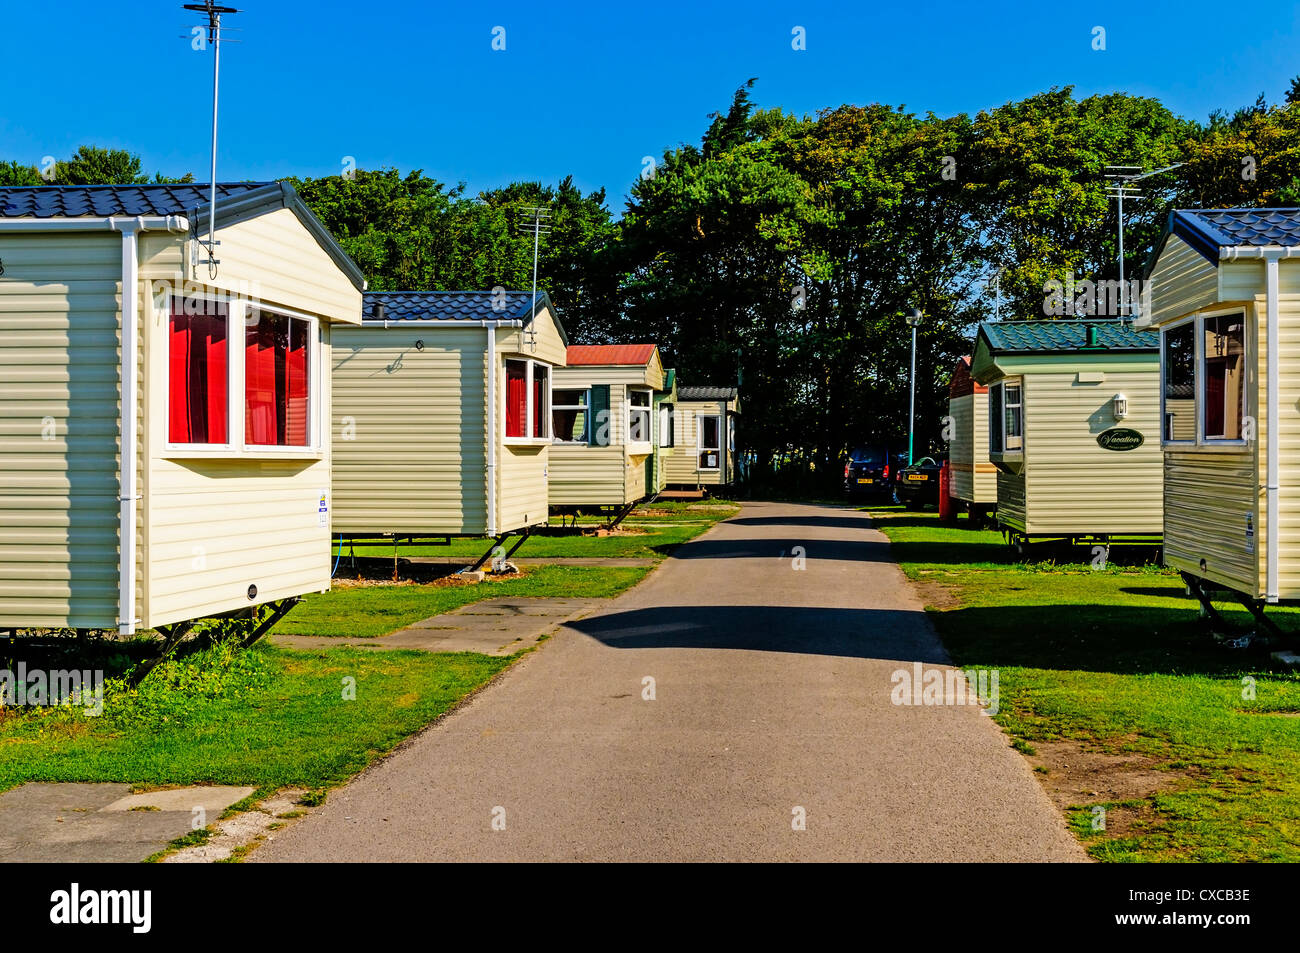 Cream coloured caravans smartly arranged on either side of a pink tinted road contrast strongly with an intensely blue sky, Stock Photo